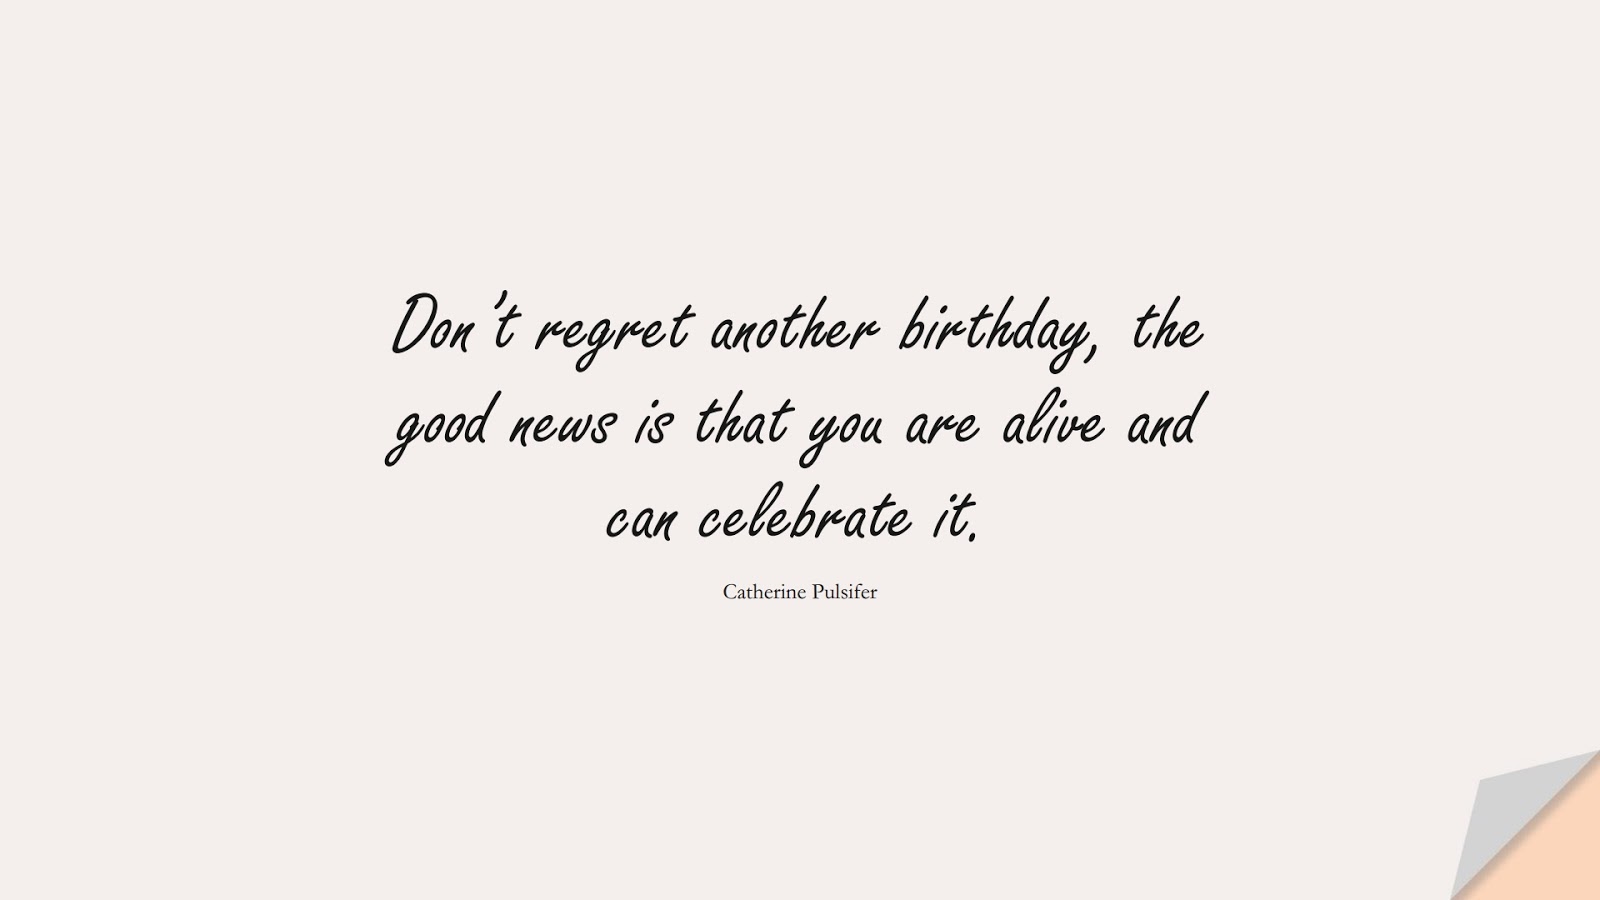 Don’t regret another birthday, the good news is that you are alive and can celebrate it. (Catherine Pulsifer);  #BirthdayQuotes